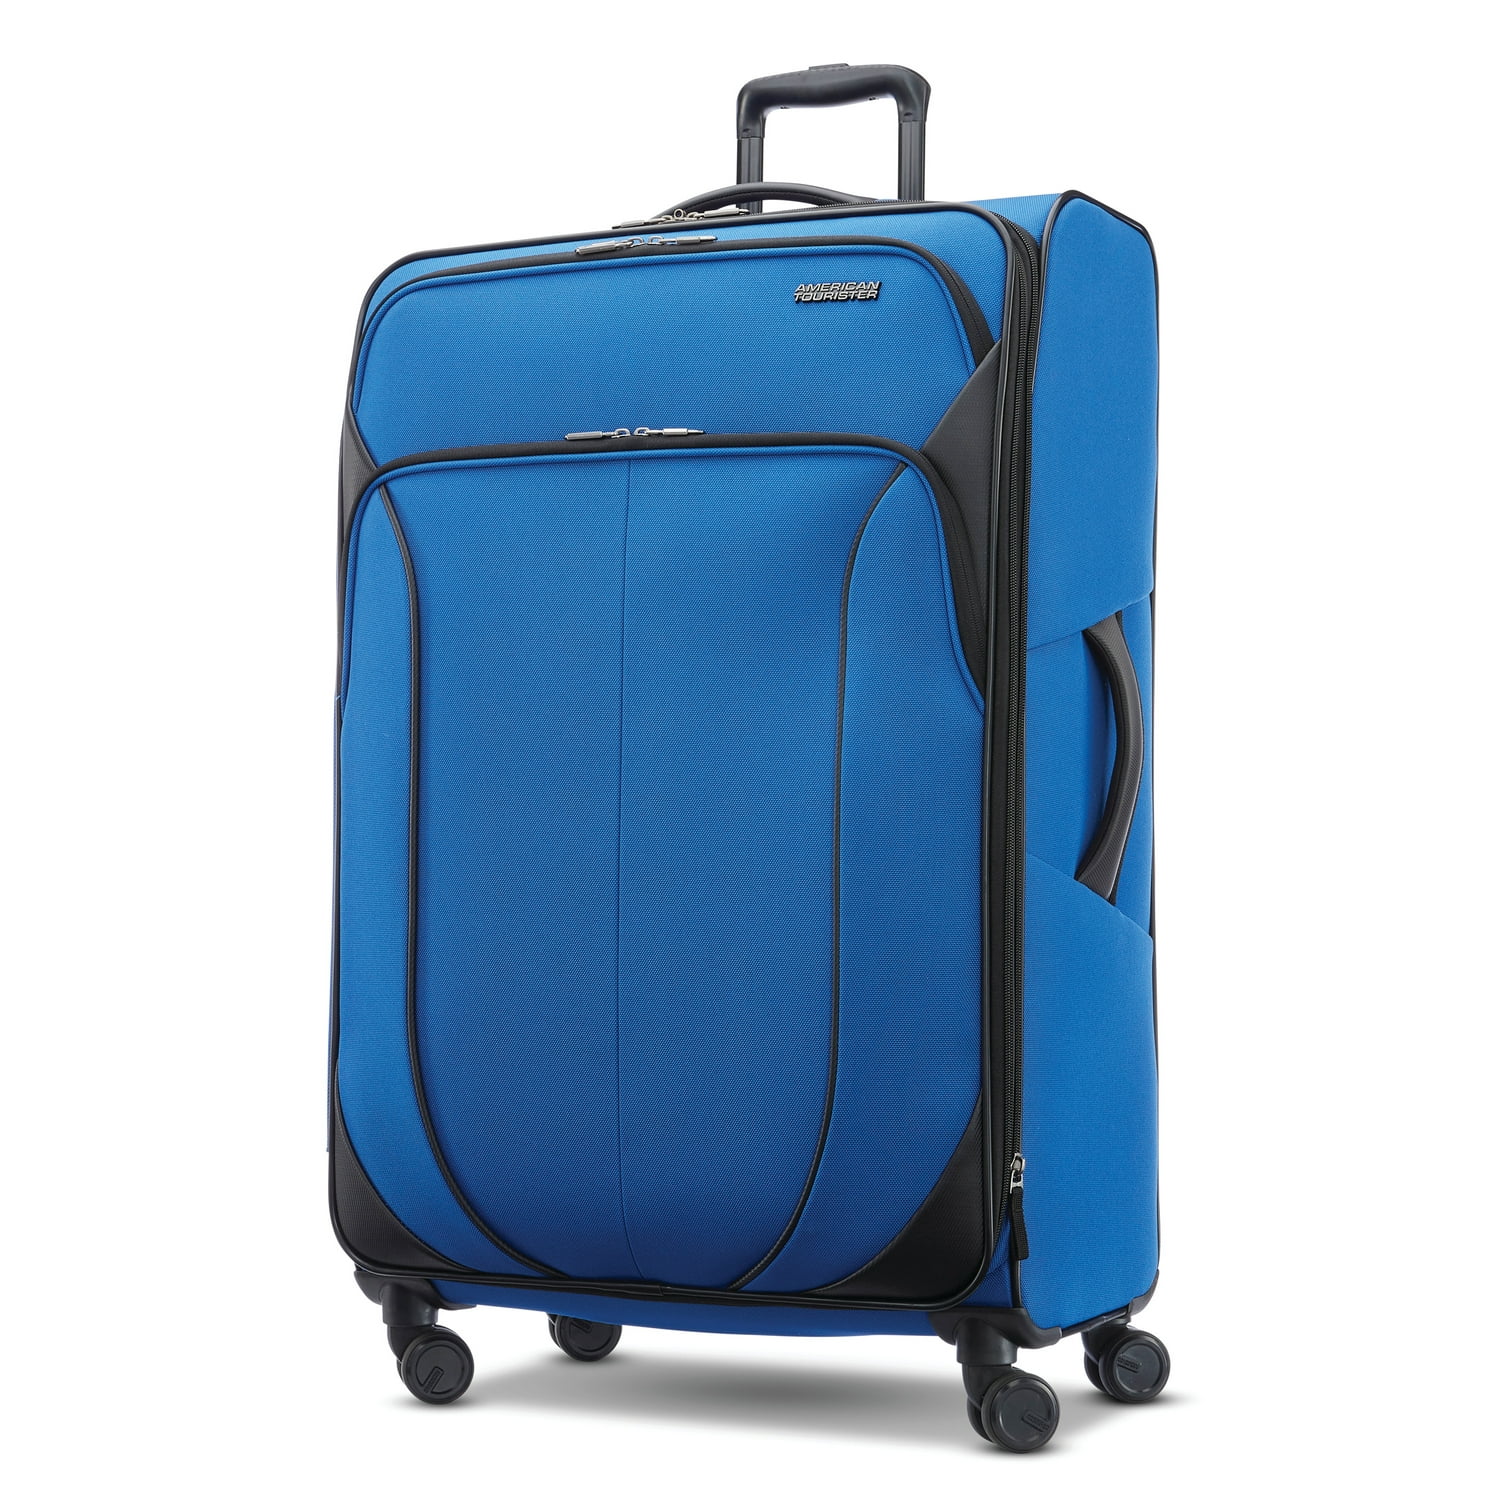 Walmart+ Members: 28" American Tourister 4 KIX 2.0 Upright Spinner Luggage (Classic Blue or Purple Orchid) + $8 Walmart Cash $55.30 + Free Shipping